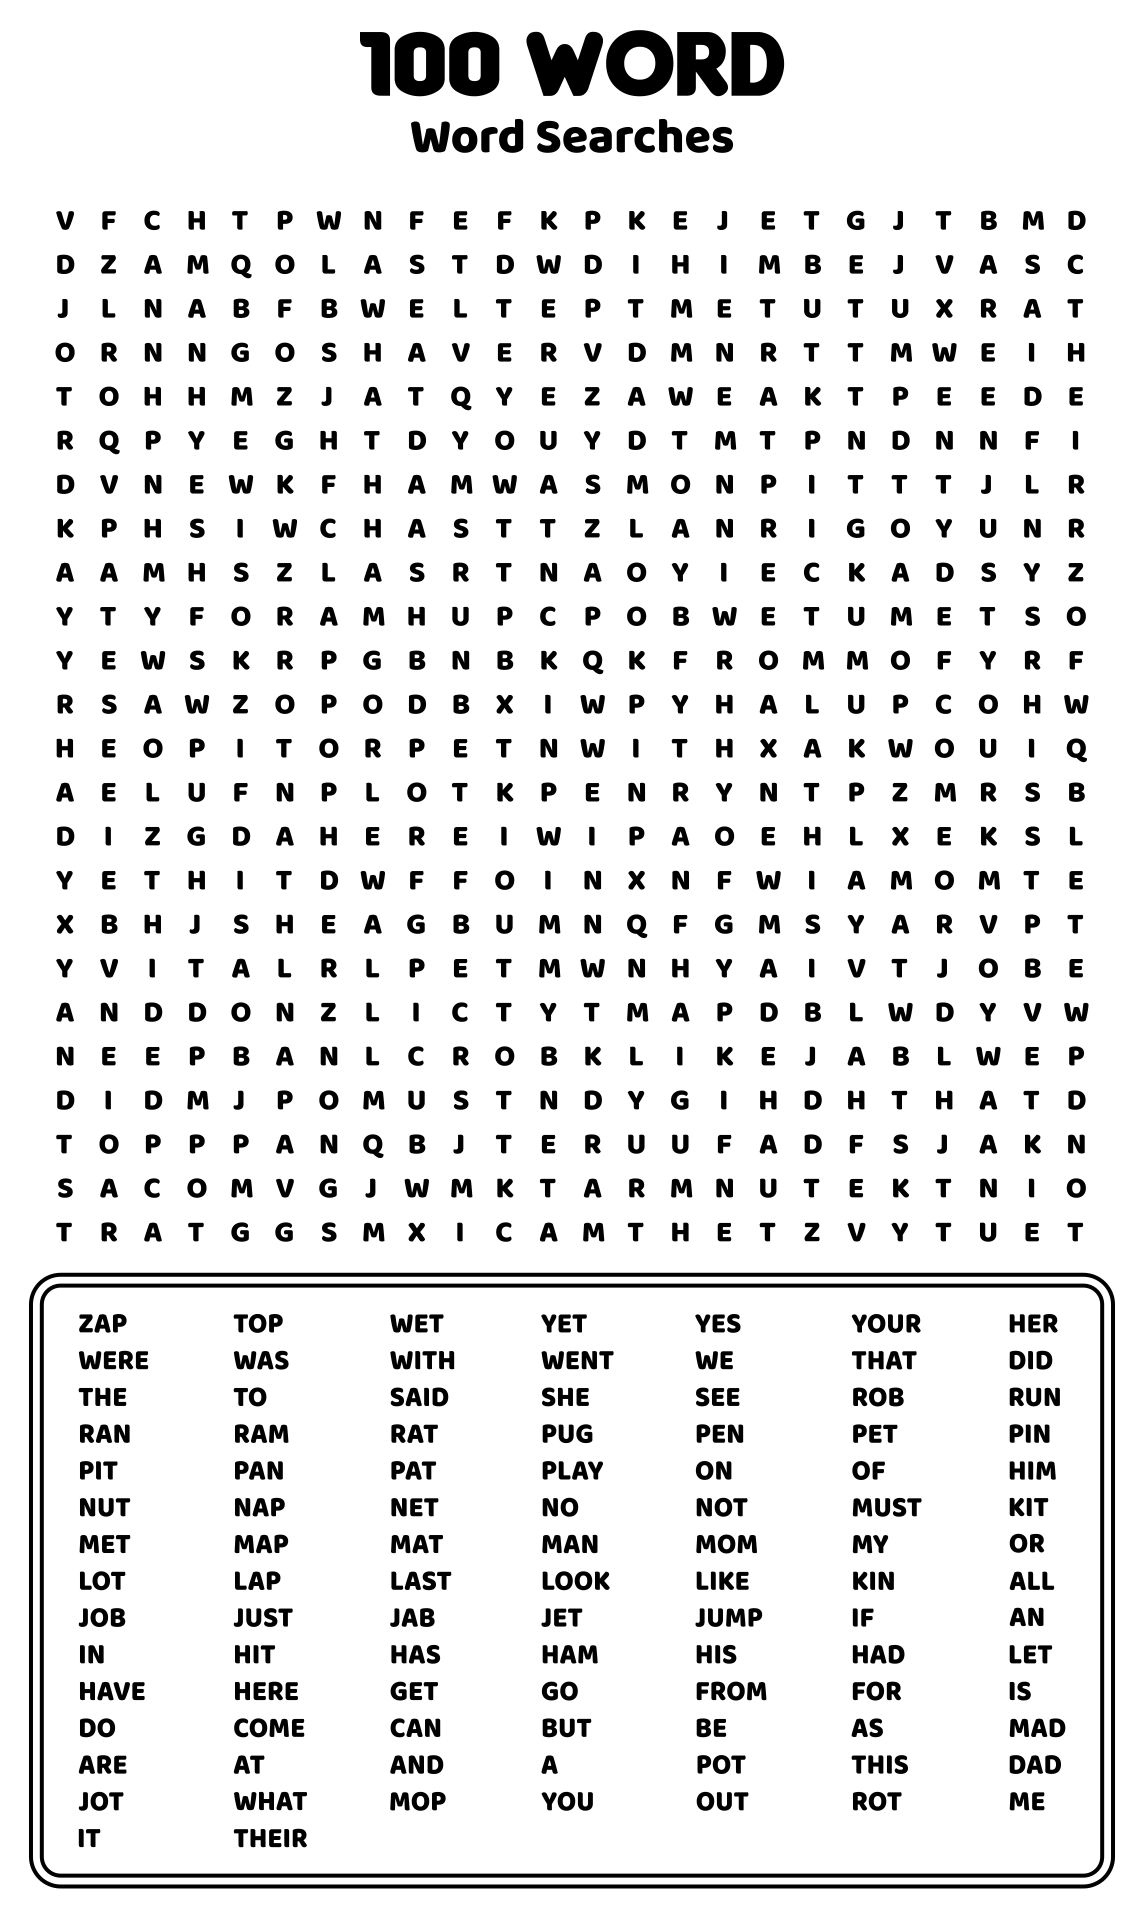 word-search-puzzles-hard-word-search-printable